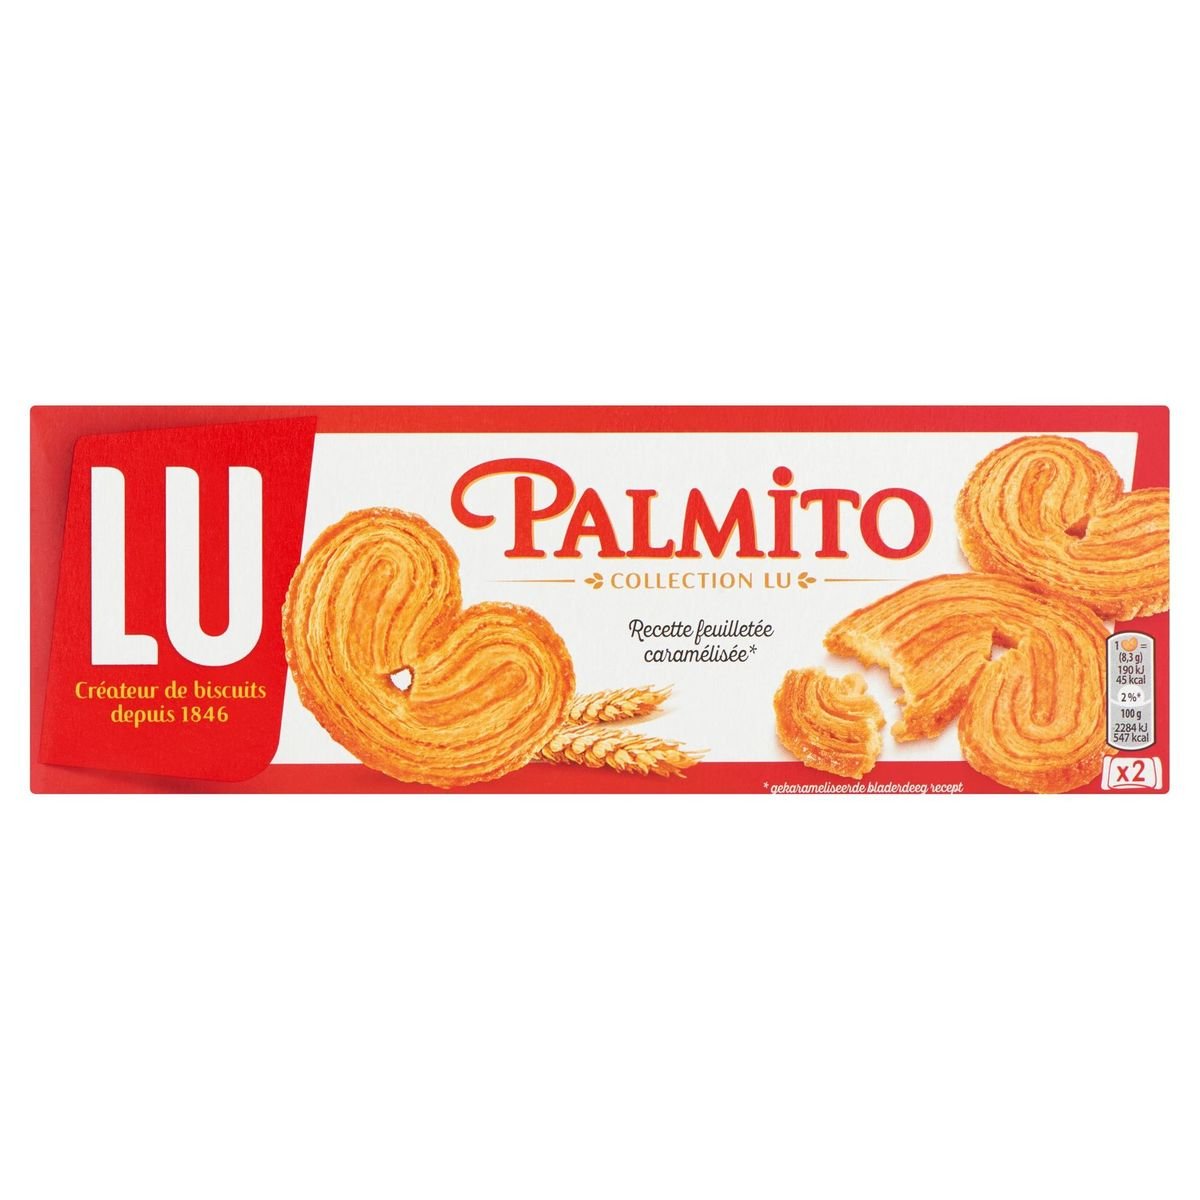 LU Palmito Biscuits 100 g